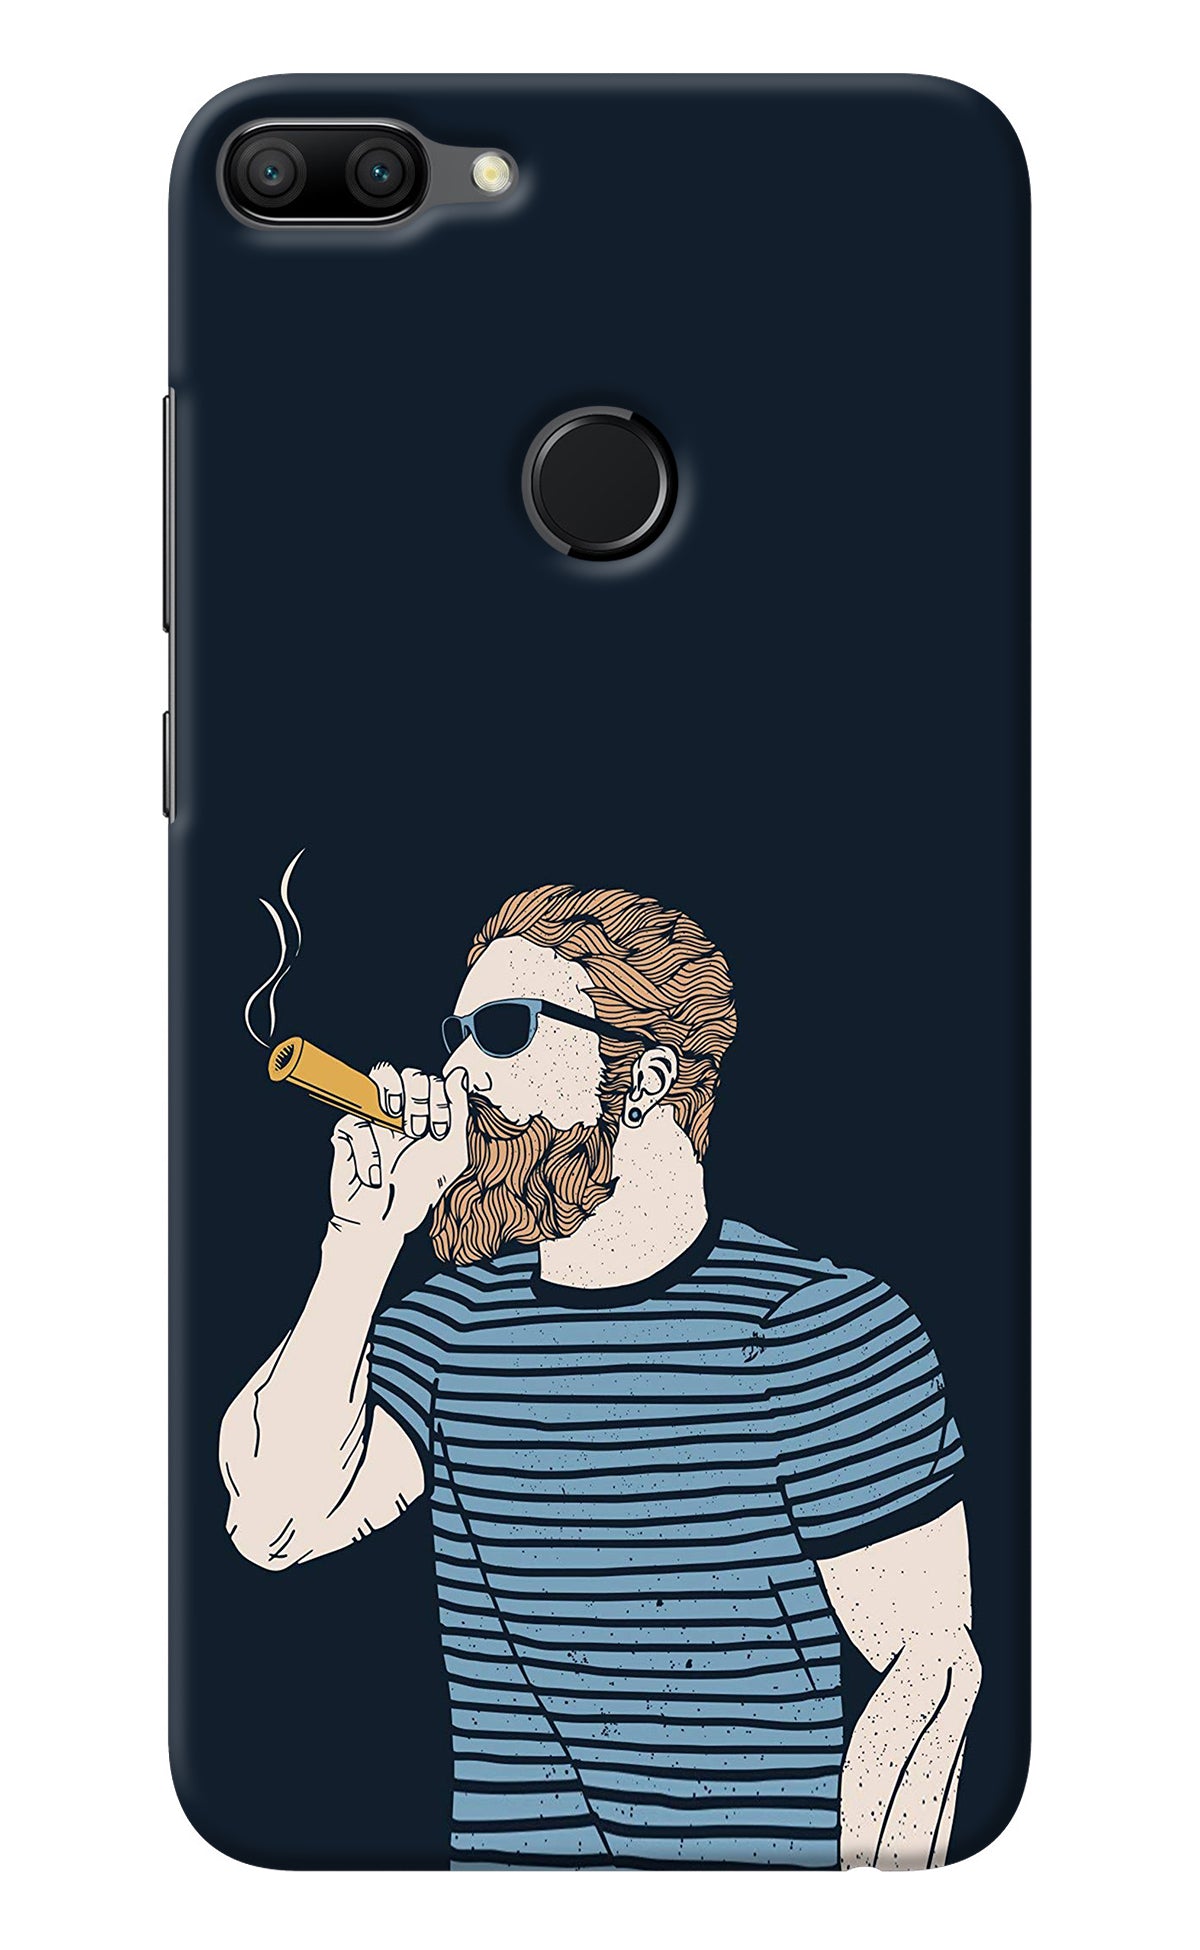 Smoking Honor 9N Back Cover